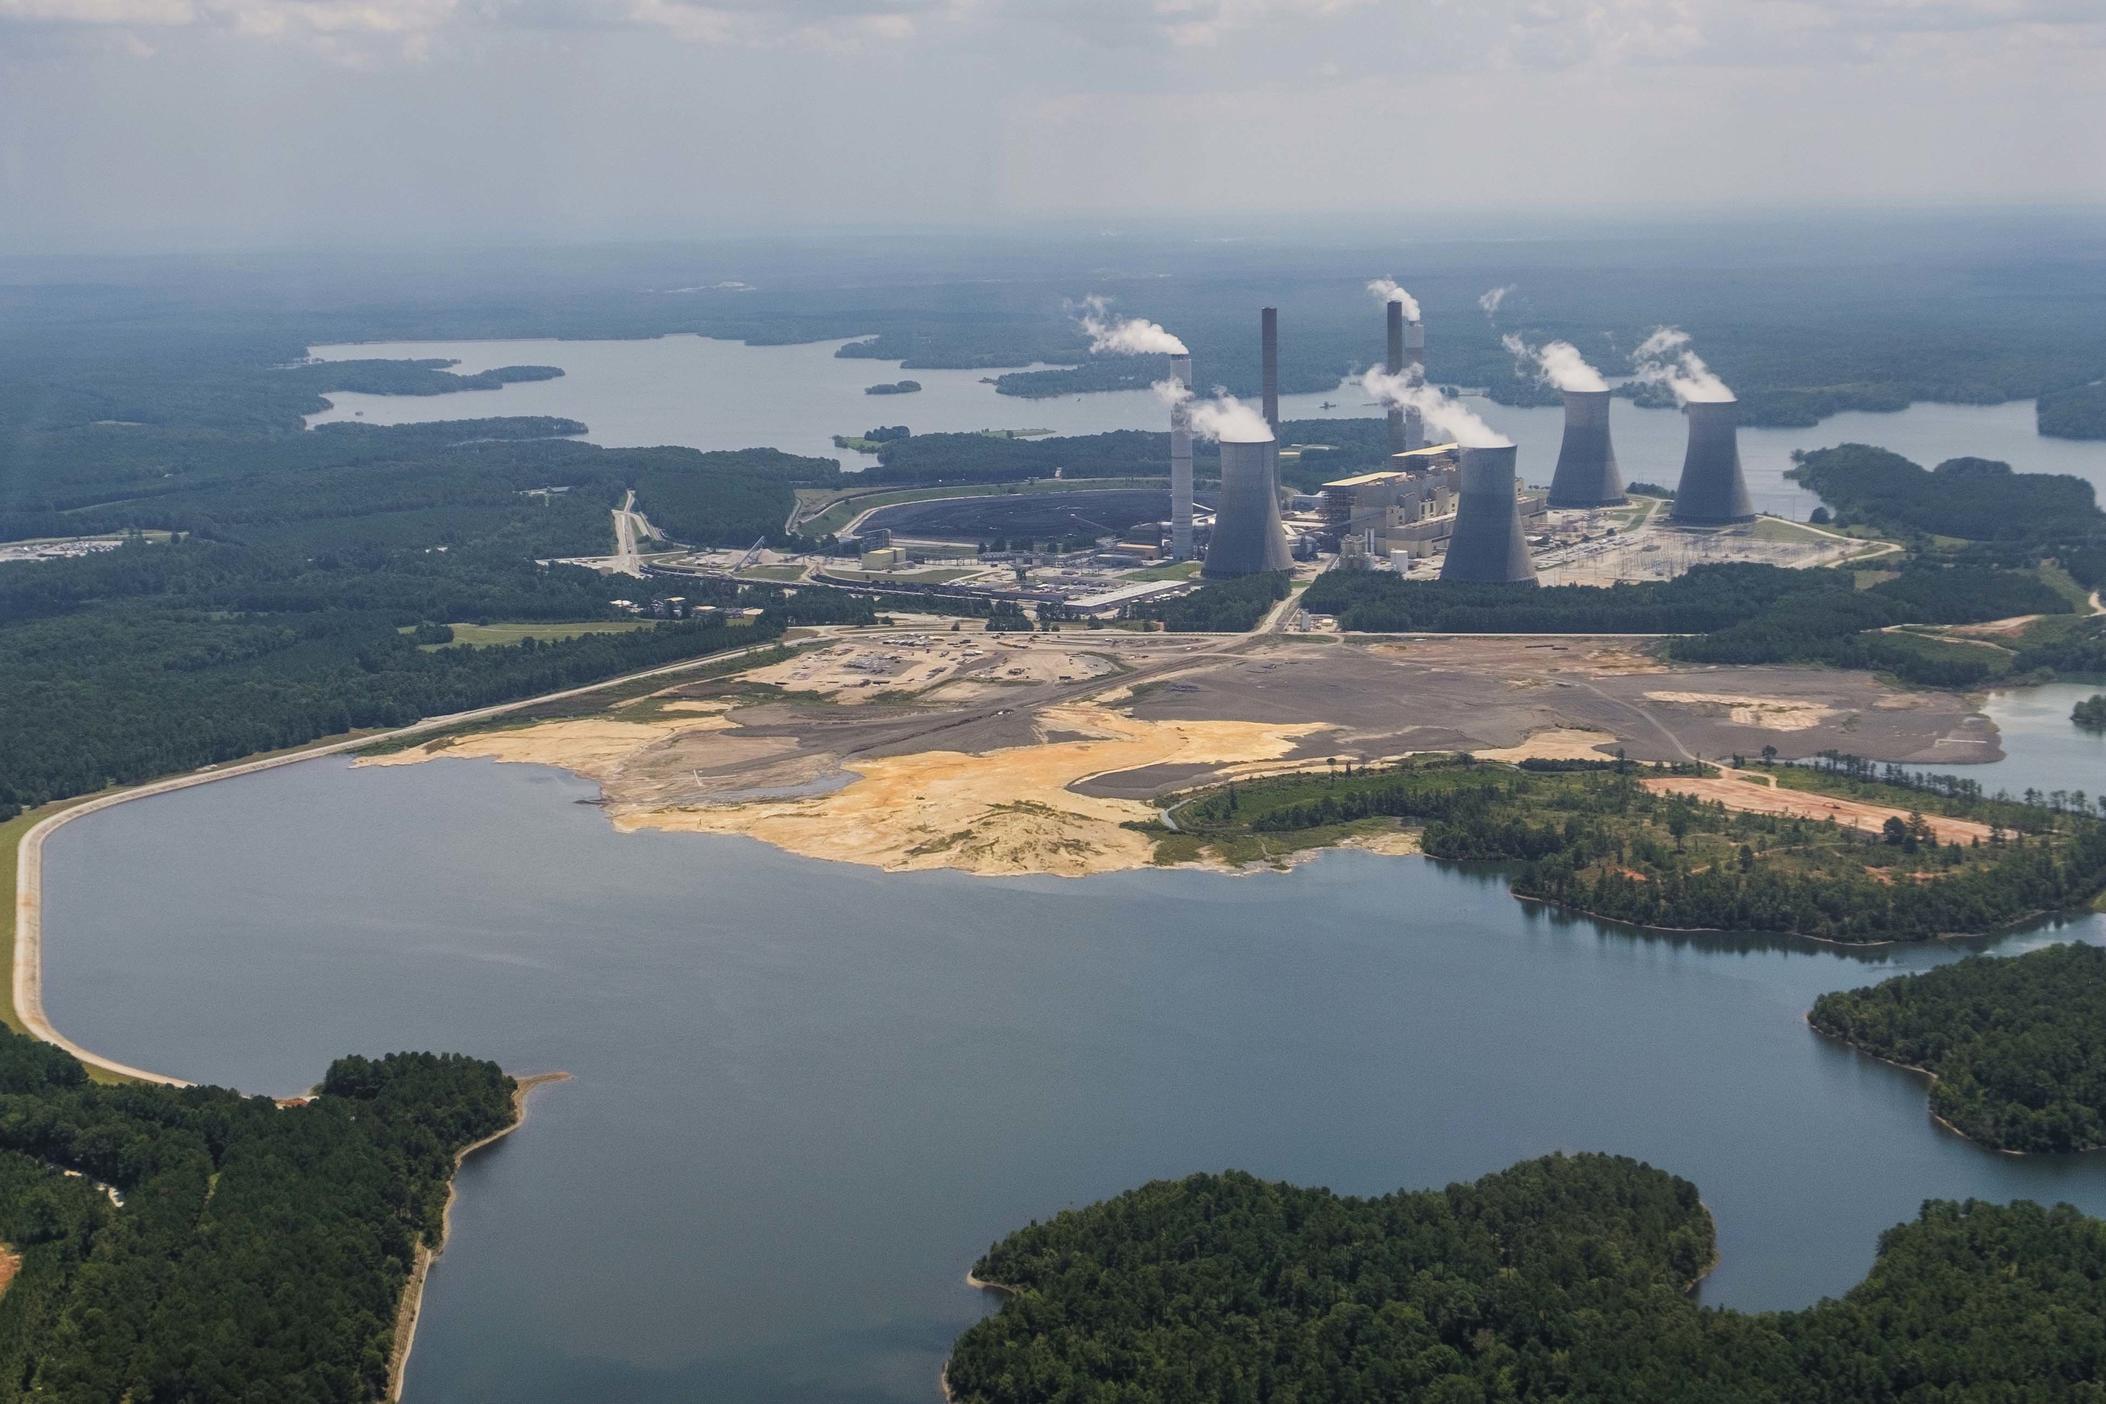 Until 2020, when coal was burned at Georgia Power's Plant Scherer, the remaning toxic ash is sunk into the body of water in the foreground. An underground stream flows through that ash at depths of up to 25 feet and out the massive ash pond. Georgia Power's plan for closing that pond would keep much of the coal ash in that state.